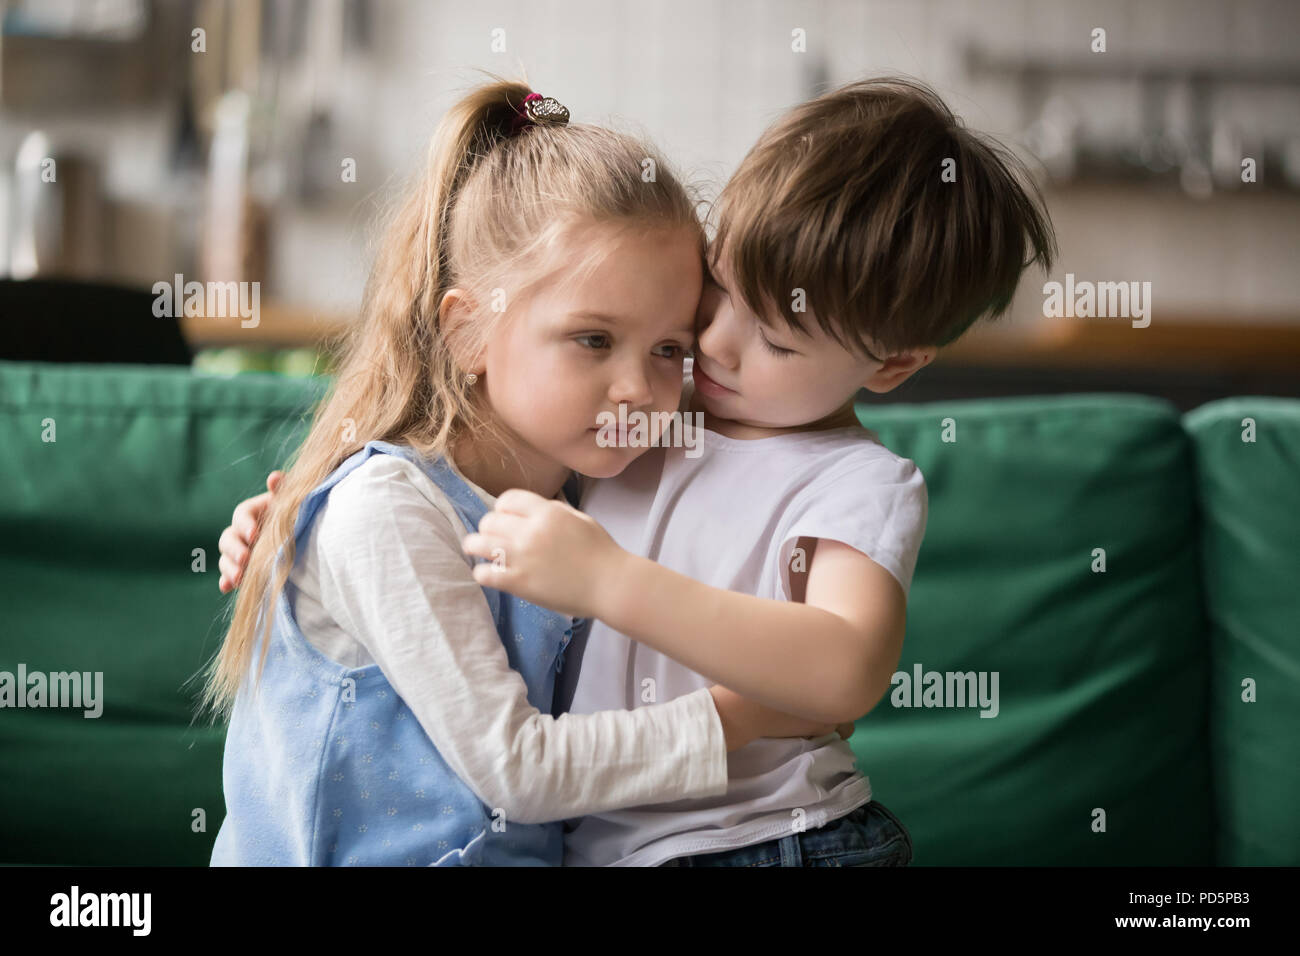 Little boy brother consoling and supporting upset girl embracing Stock Photo